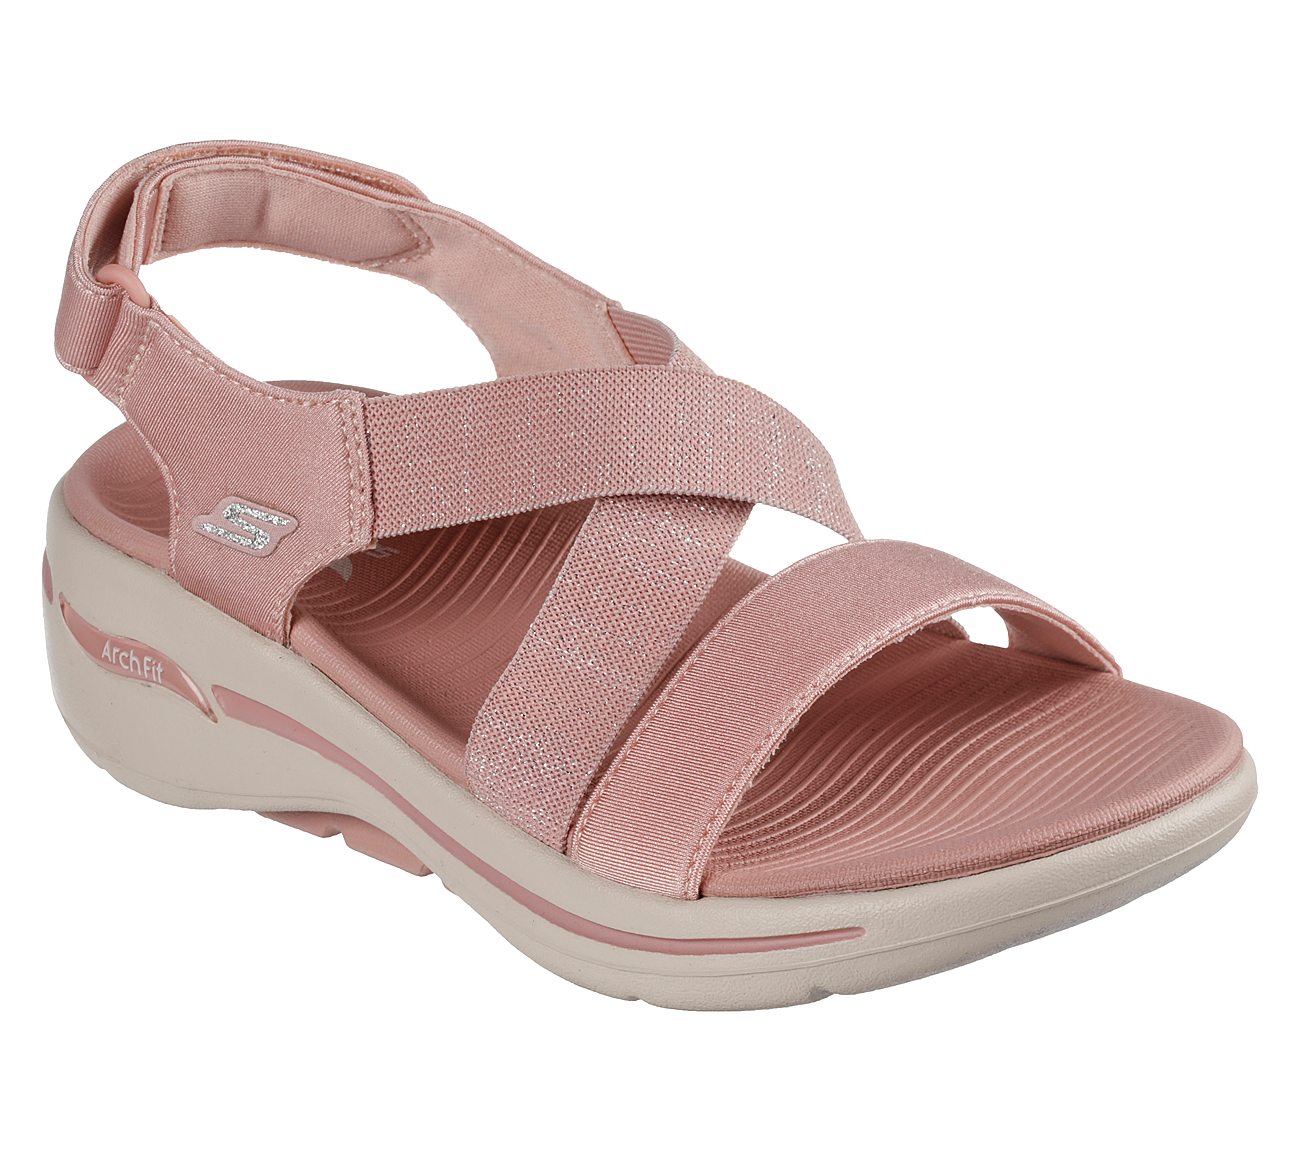 GO WALK ARCH FIT SANDAL - AST, ROSE Footwear Lateral View